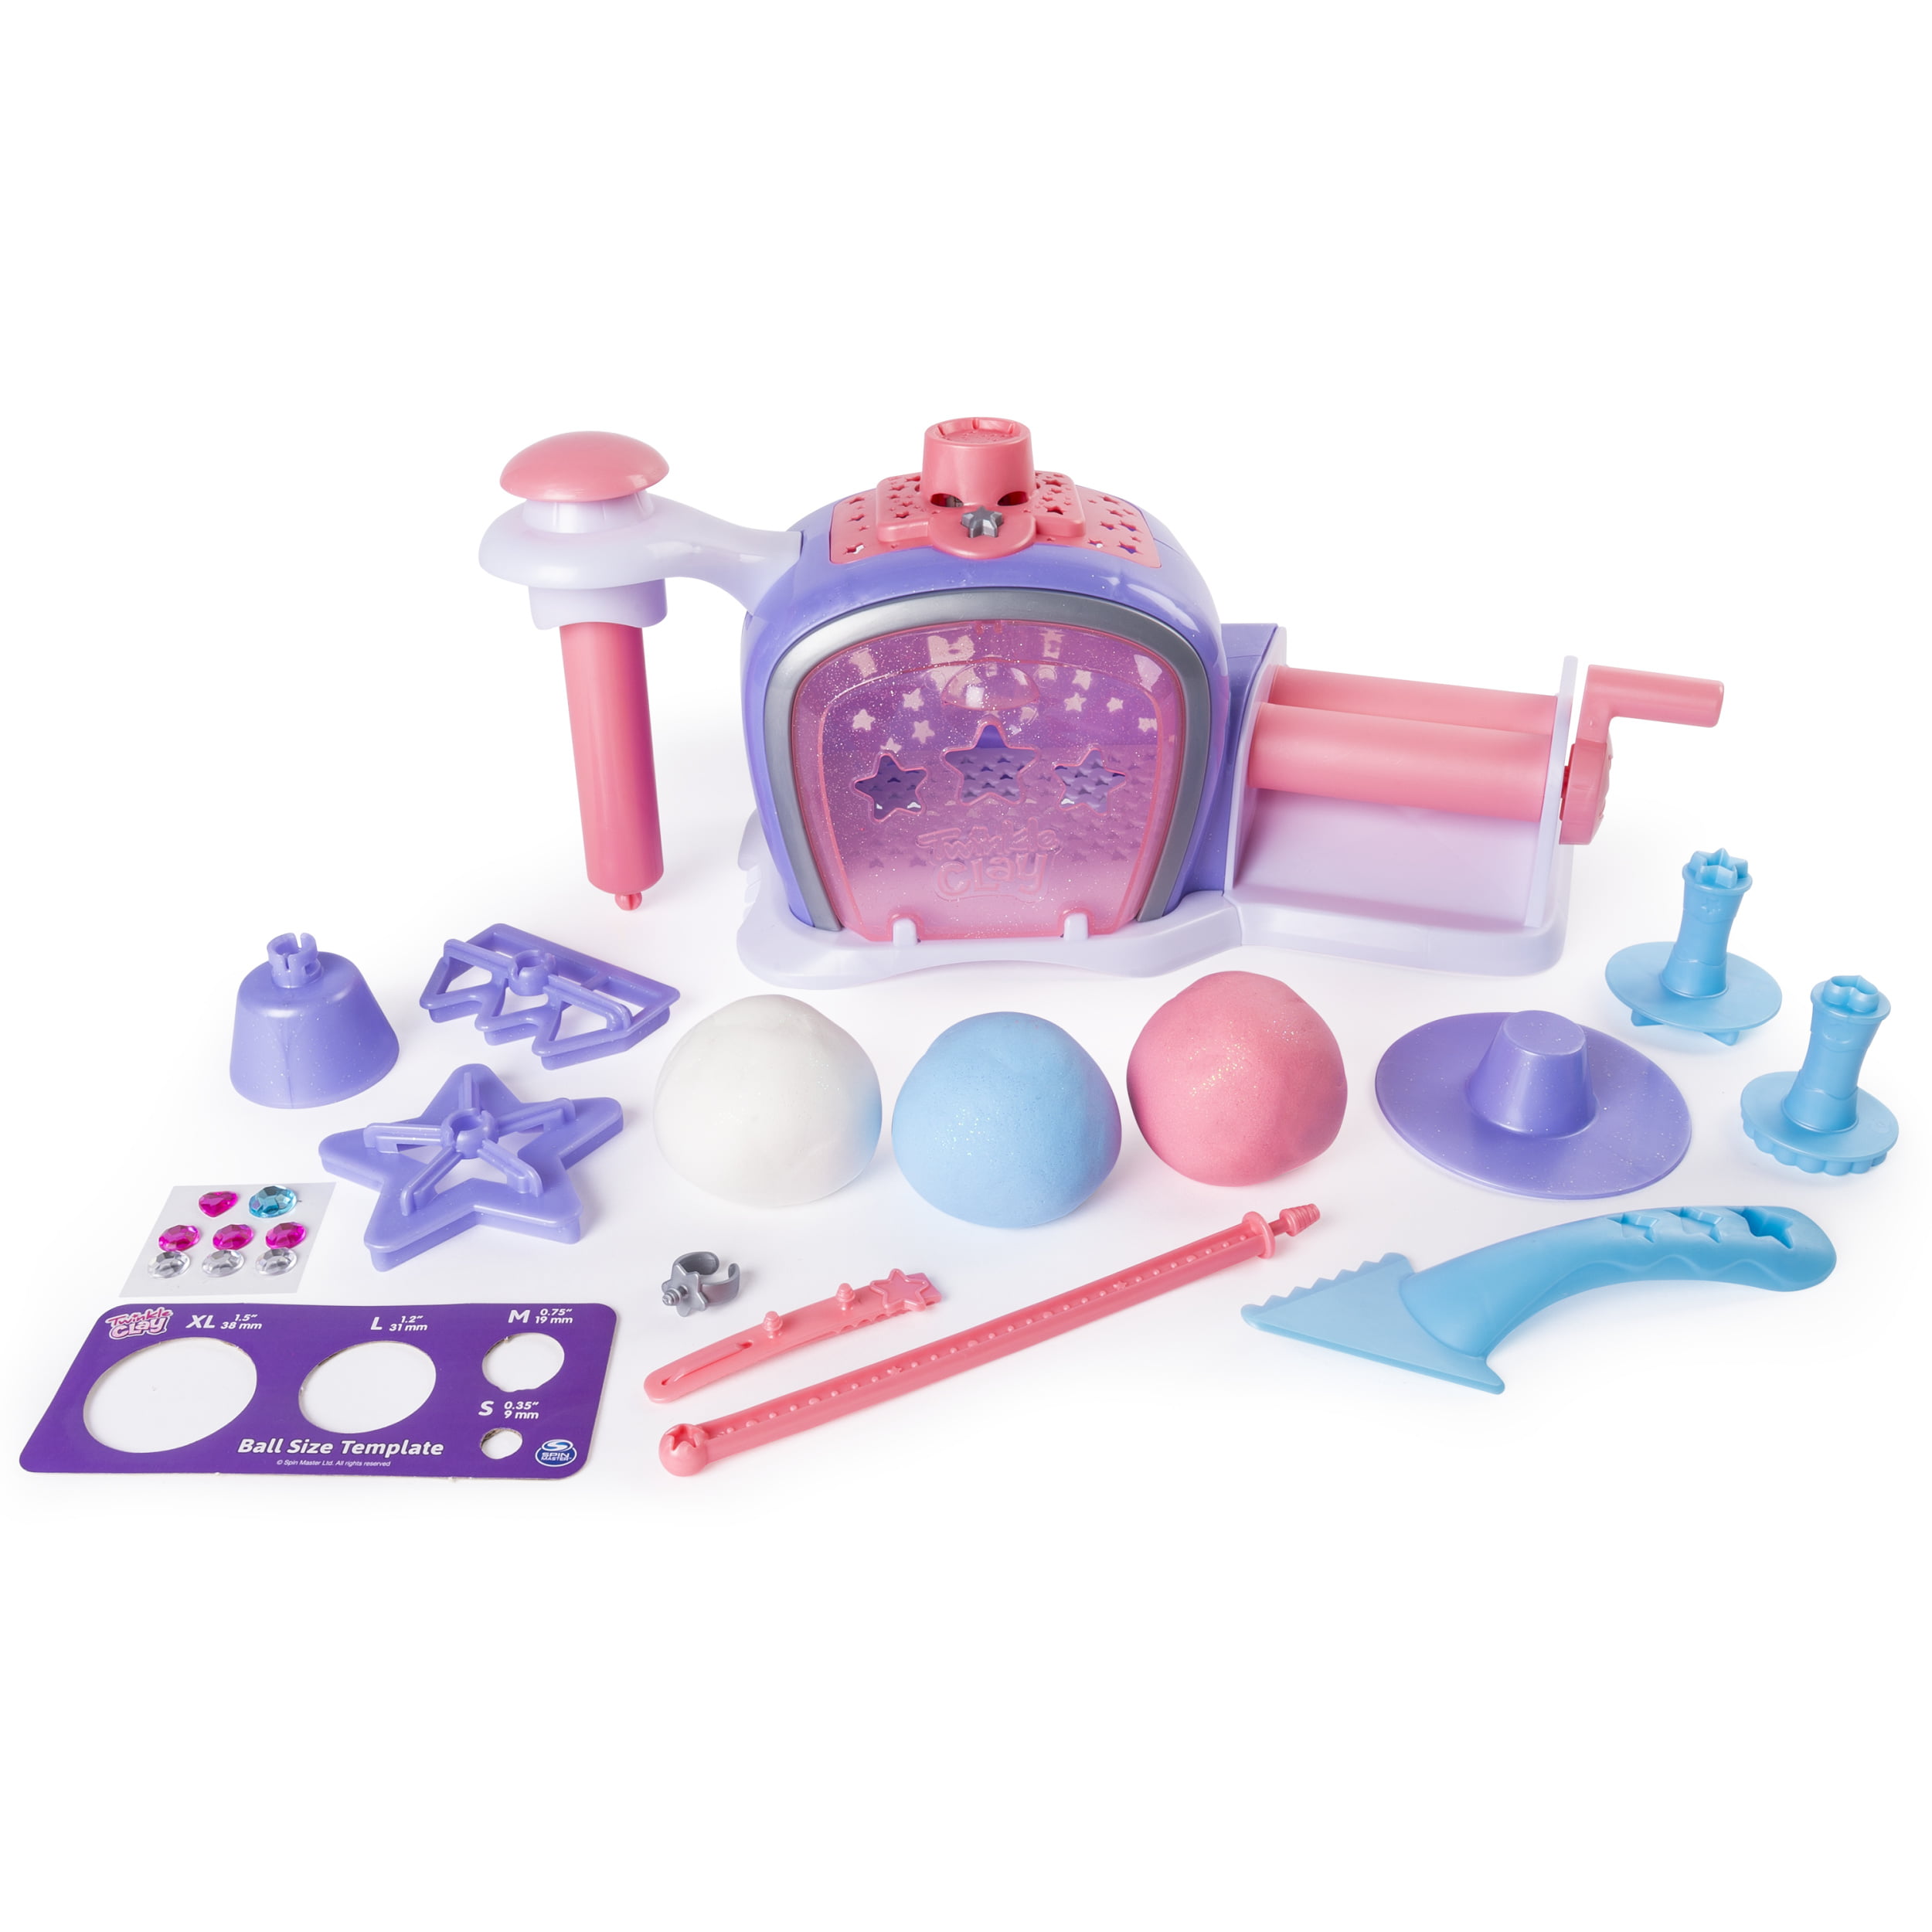 for Ages 4 and Up Twinkle Clay Princess Studio Makes Sparkly Air-Dry Clay Creations